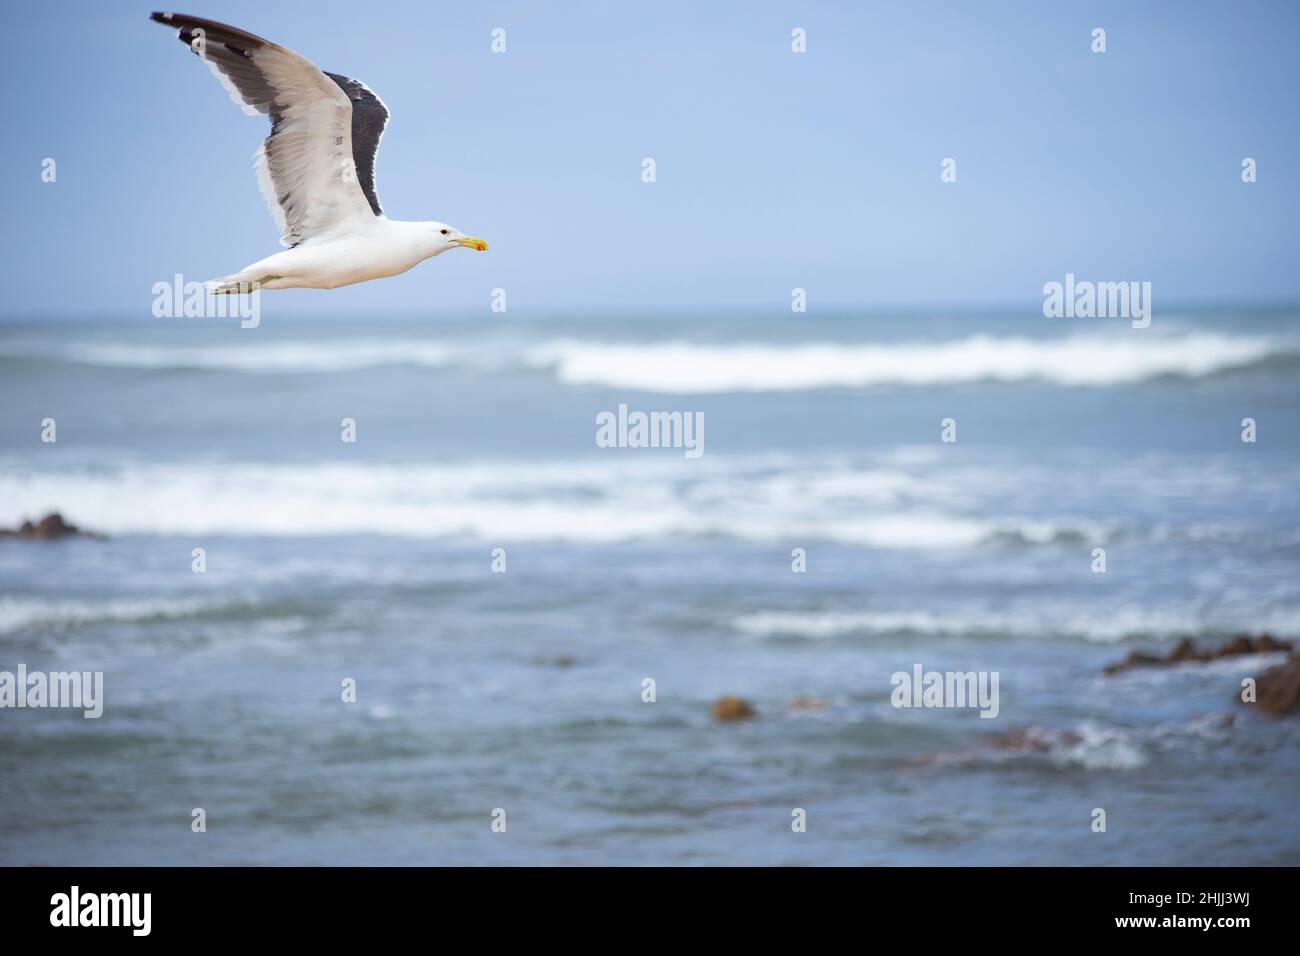 Lone Seagull in flight  over the ocean with copy space. Stock Photo